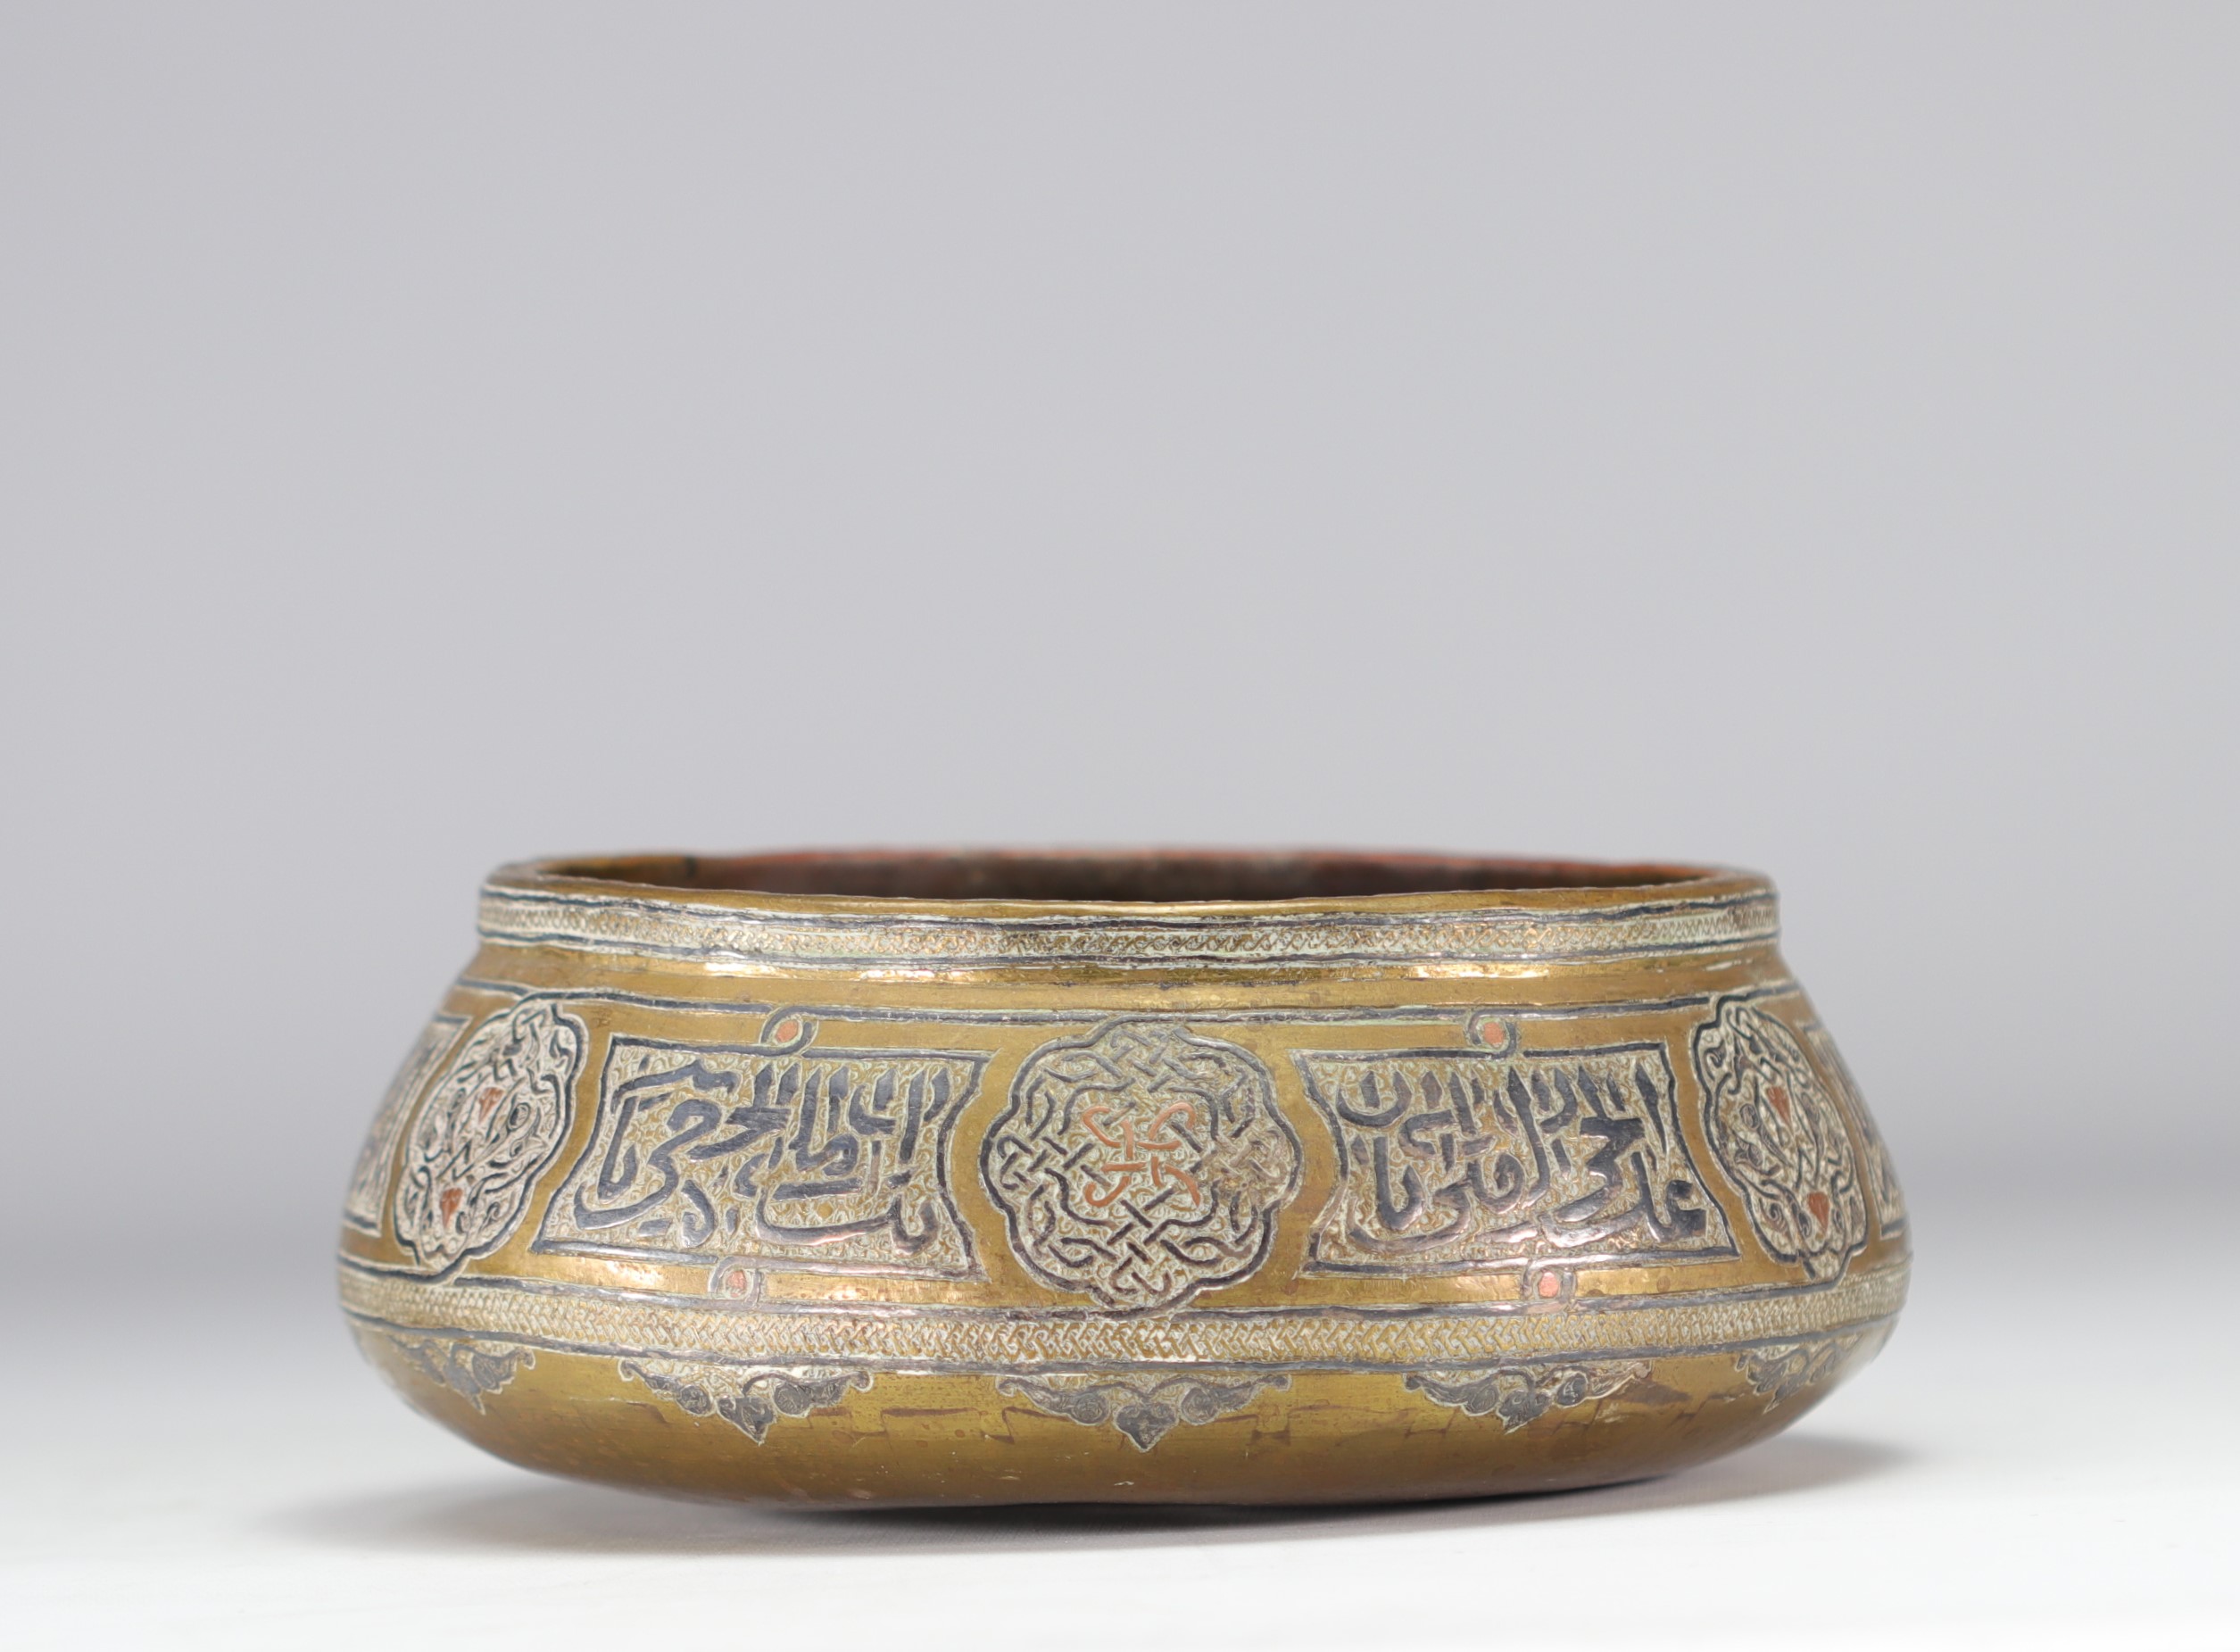 Orientalist openwork metal and silver bowl - Image 2 of 3